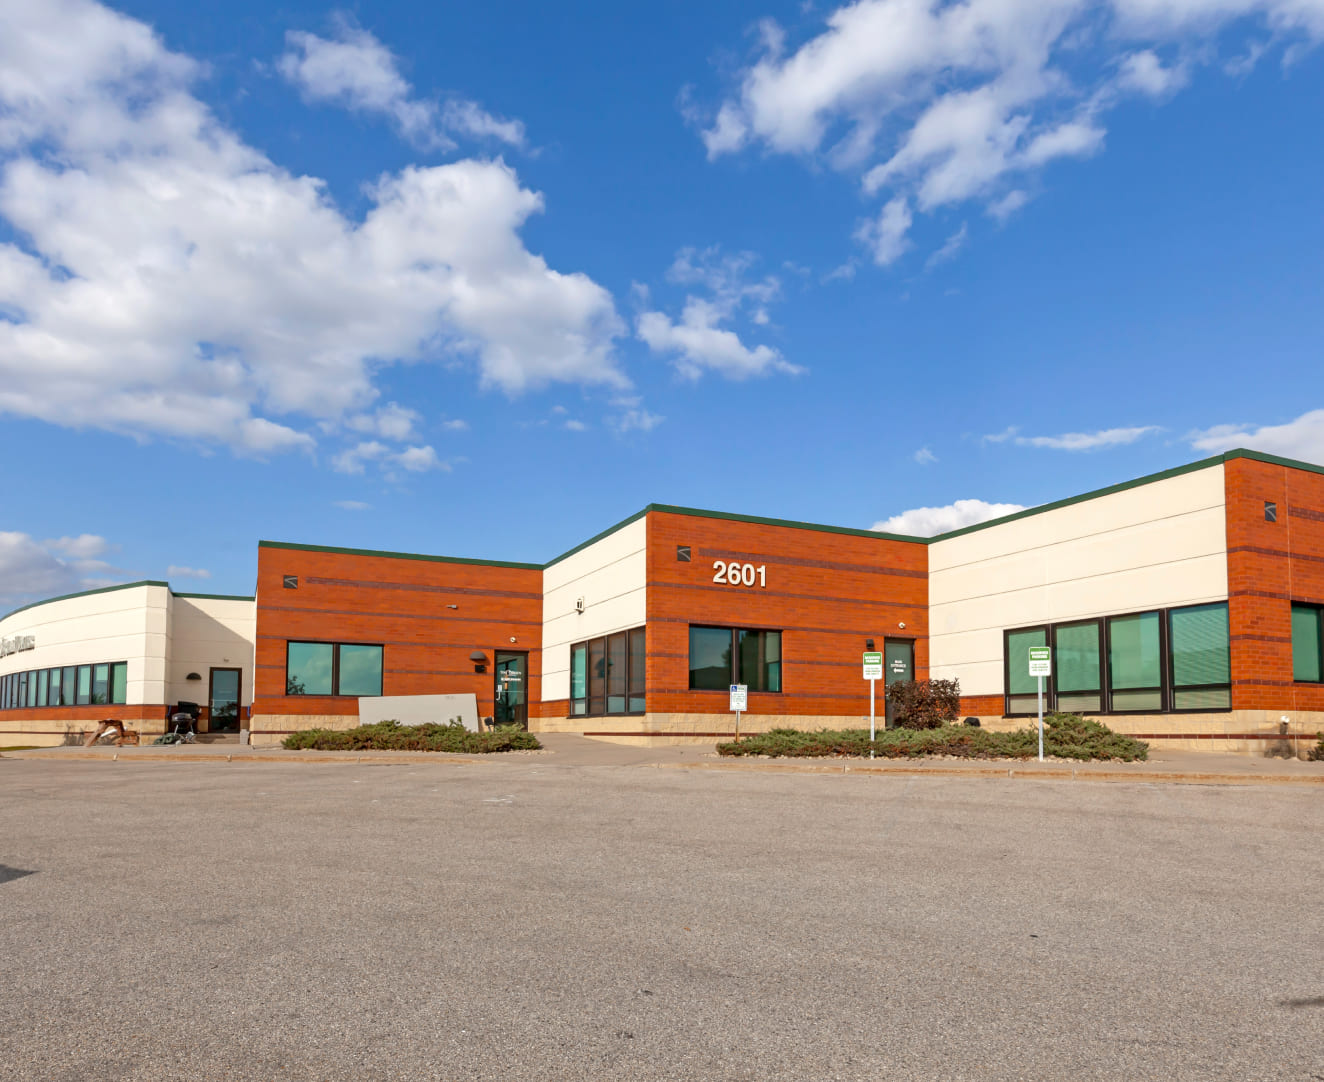 Another view of the parking lot and office building at 2601 Crossroads Drive in Madison, WI.